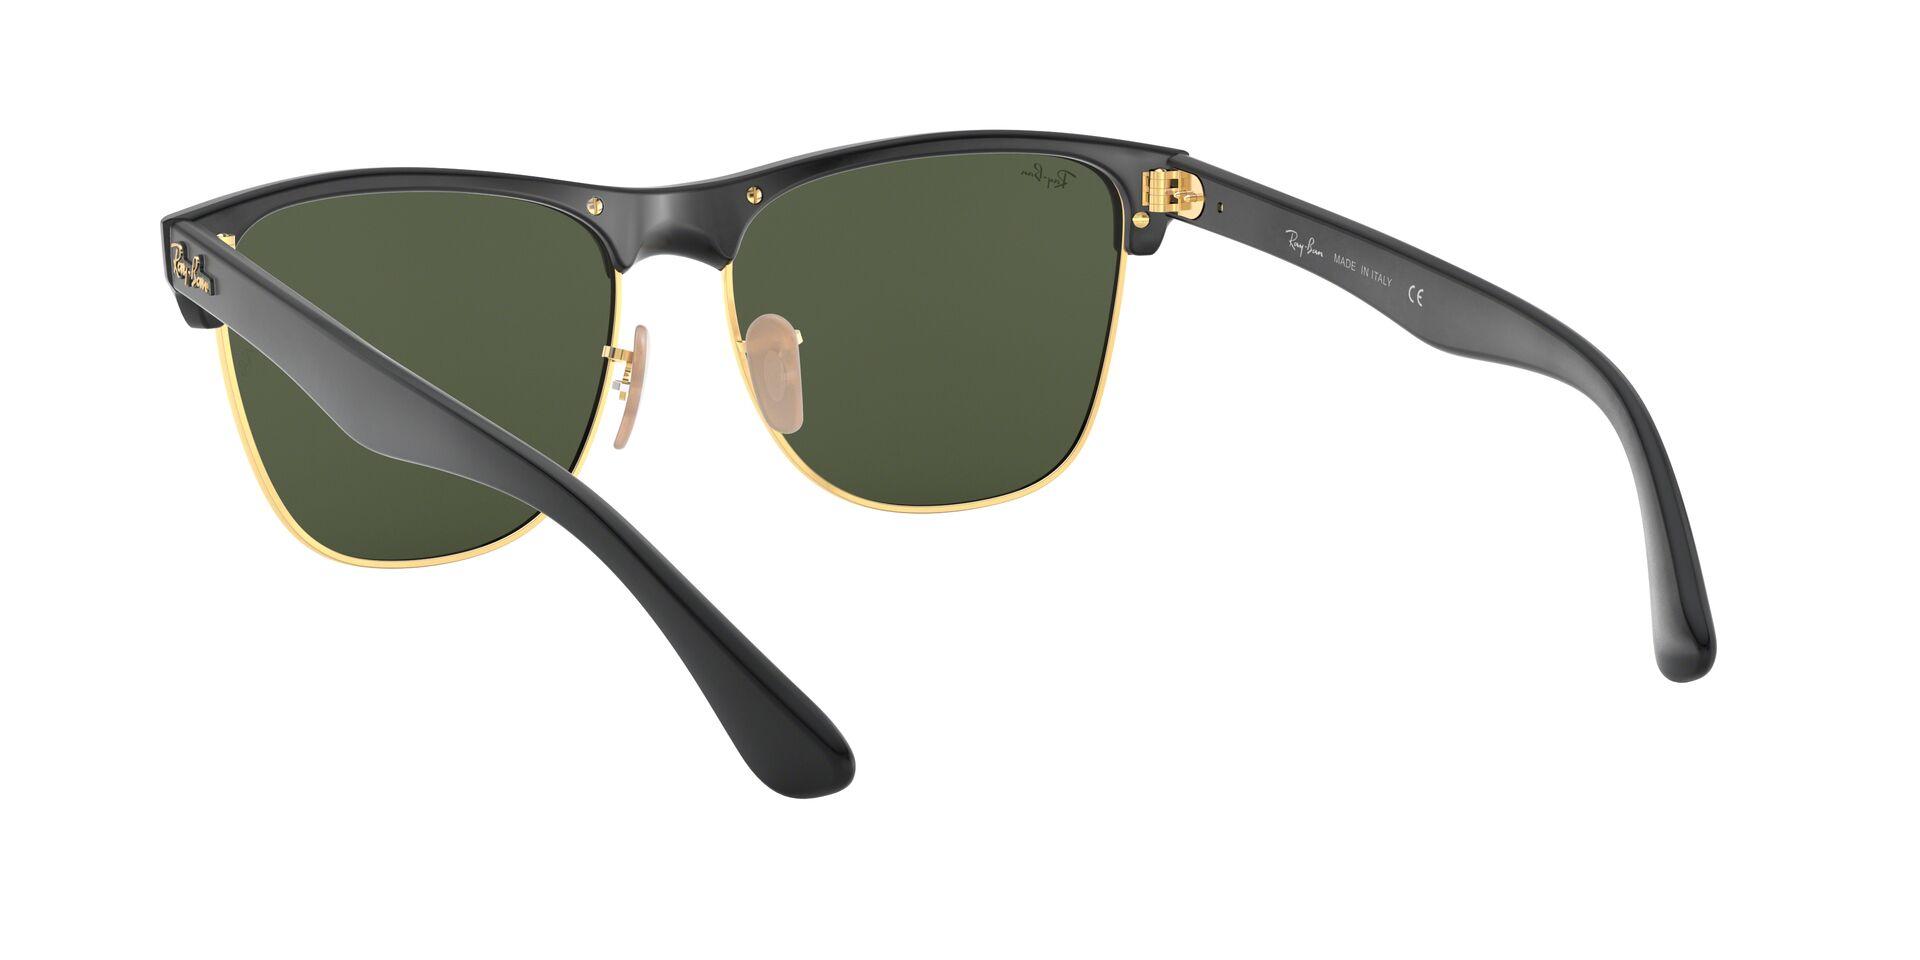 Mắt Kính Ray-Ban Clumaster Oversized - RB4175 877 -Sunglasses